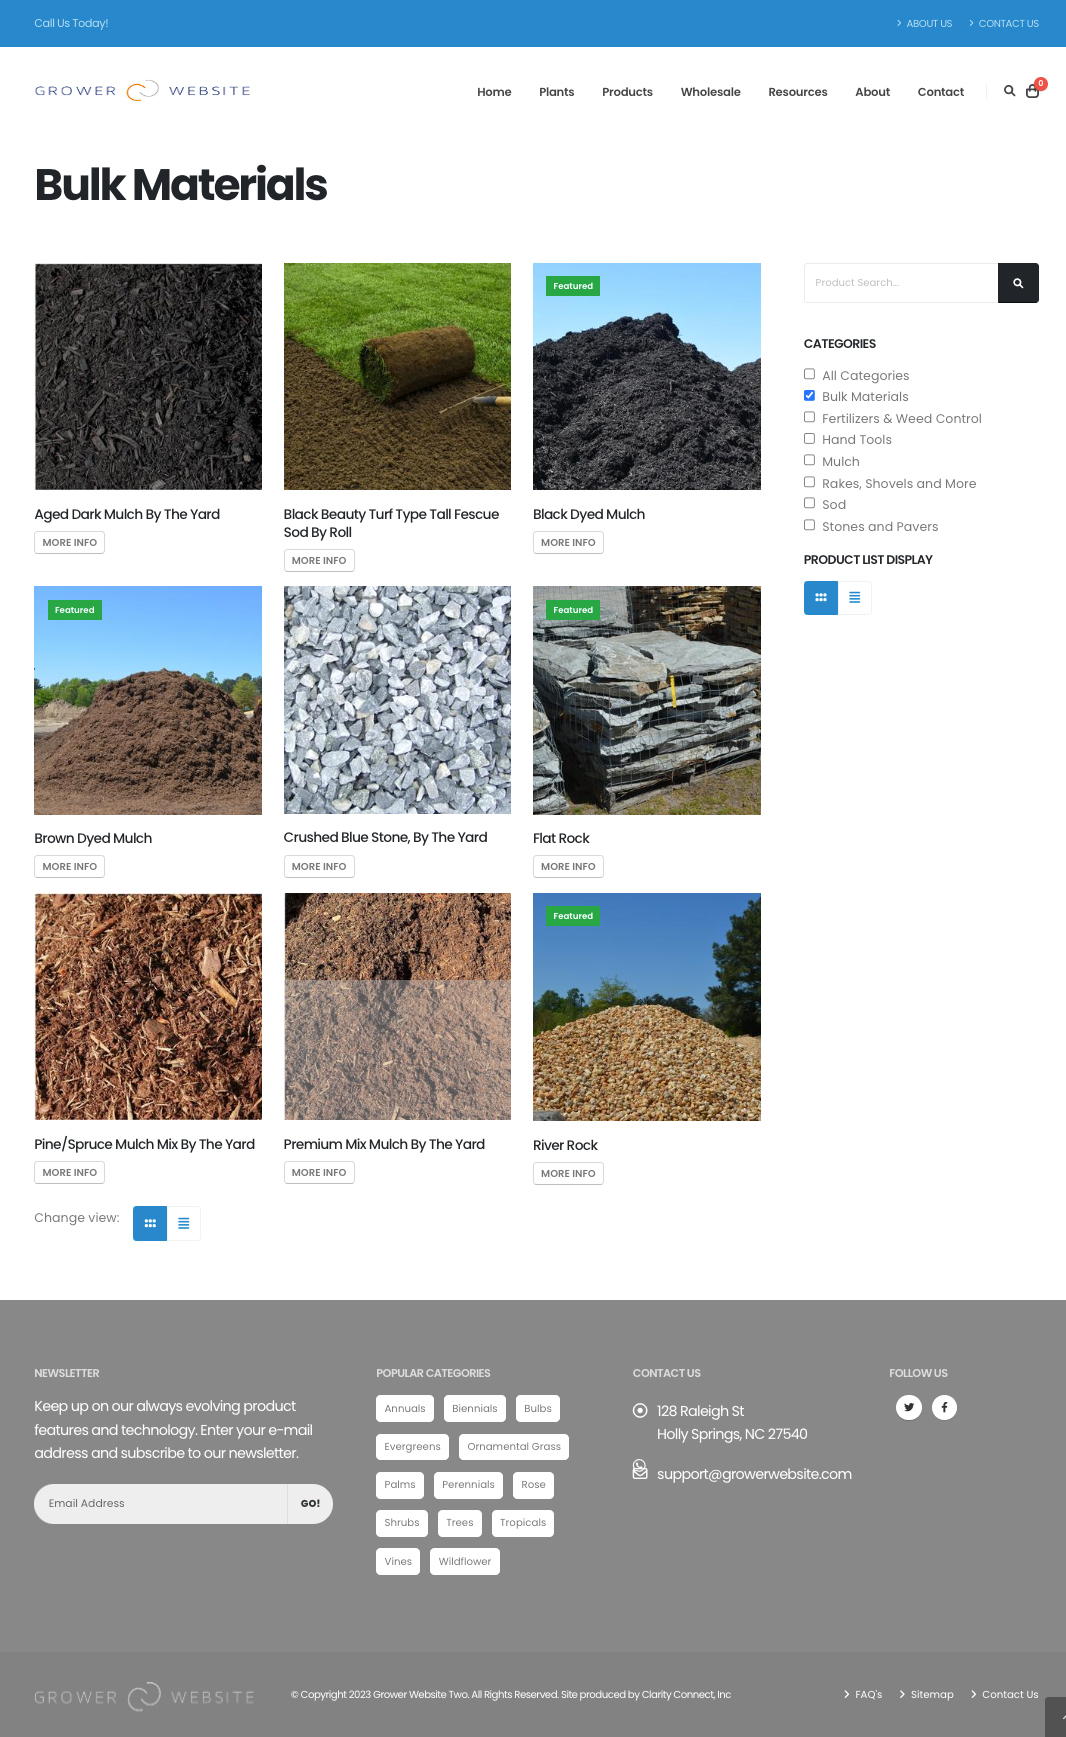 Products summary page filtered to 'Bulk Materials'